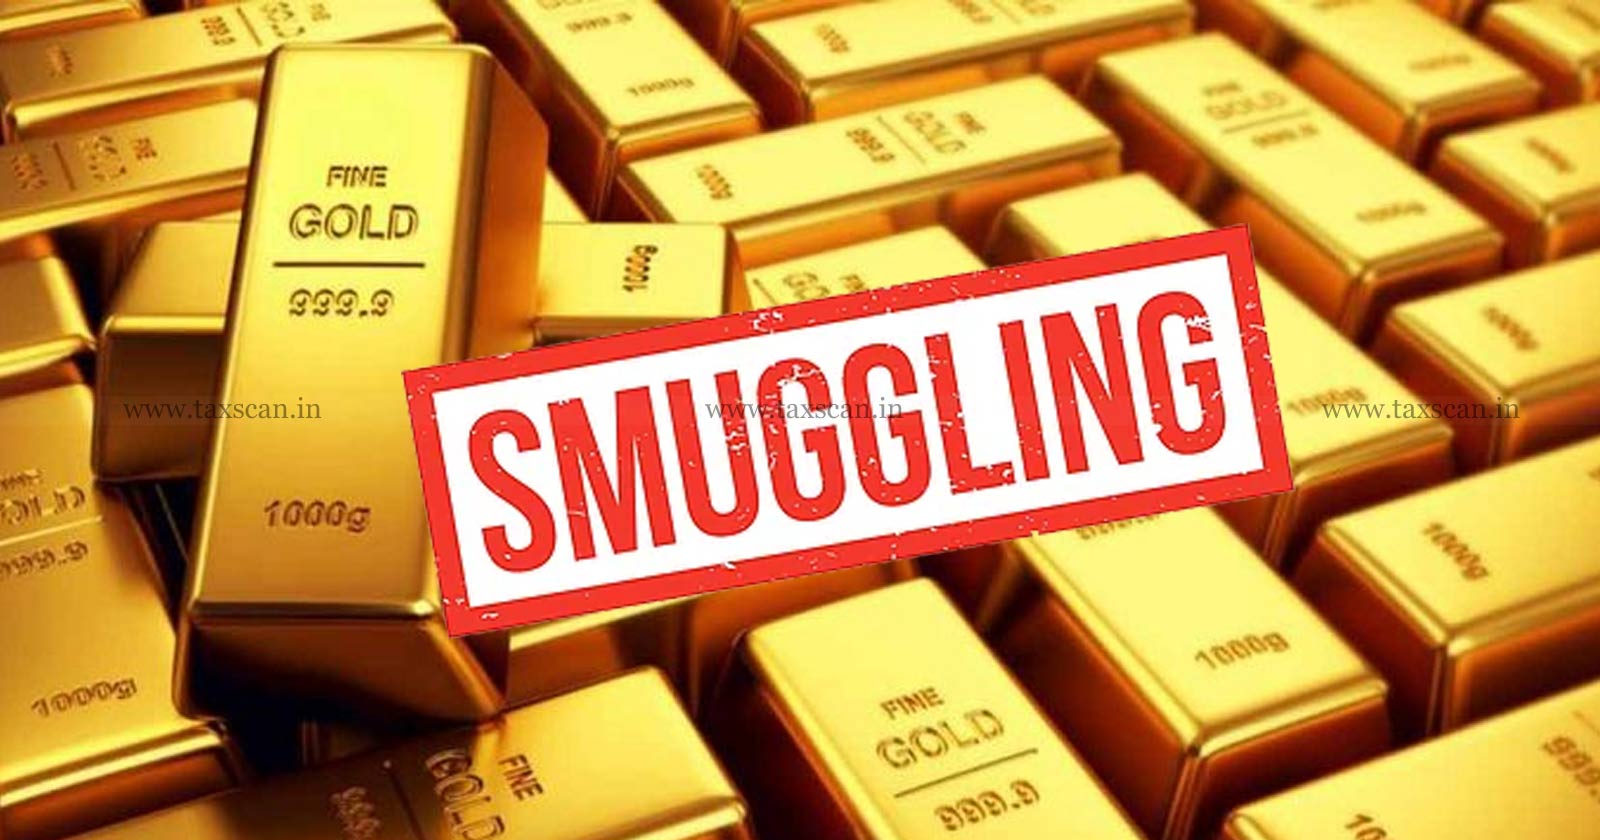 Gold Smuggling case under Diplomatic Baggage of UAE Consulate - ED attaches Properties - Chargesheet - TAXSCAN